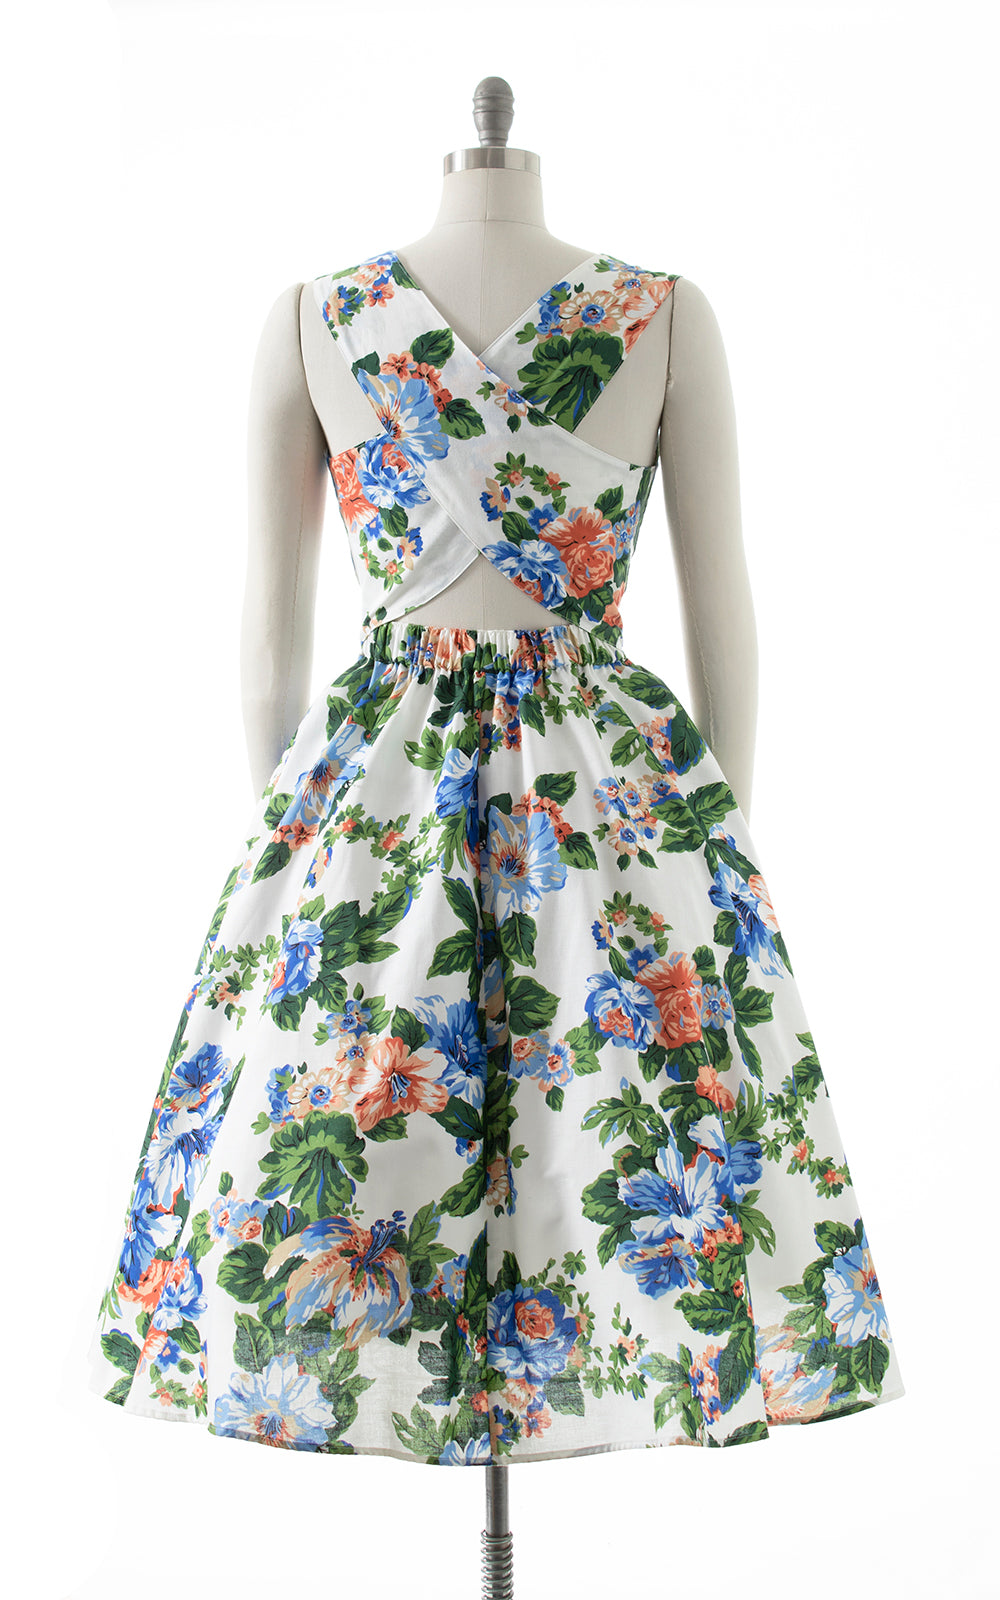 1980s CAROL ANDERSON Floral Criss-Cross Back Dress with Pockets | medium/large